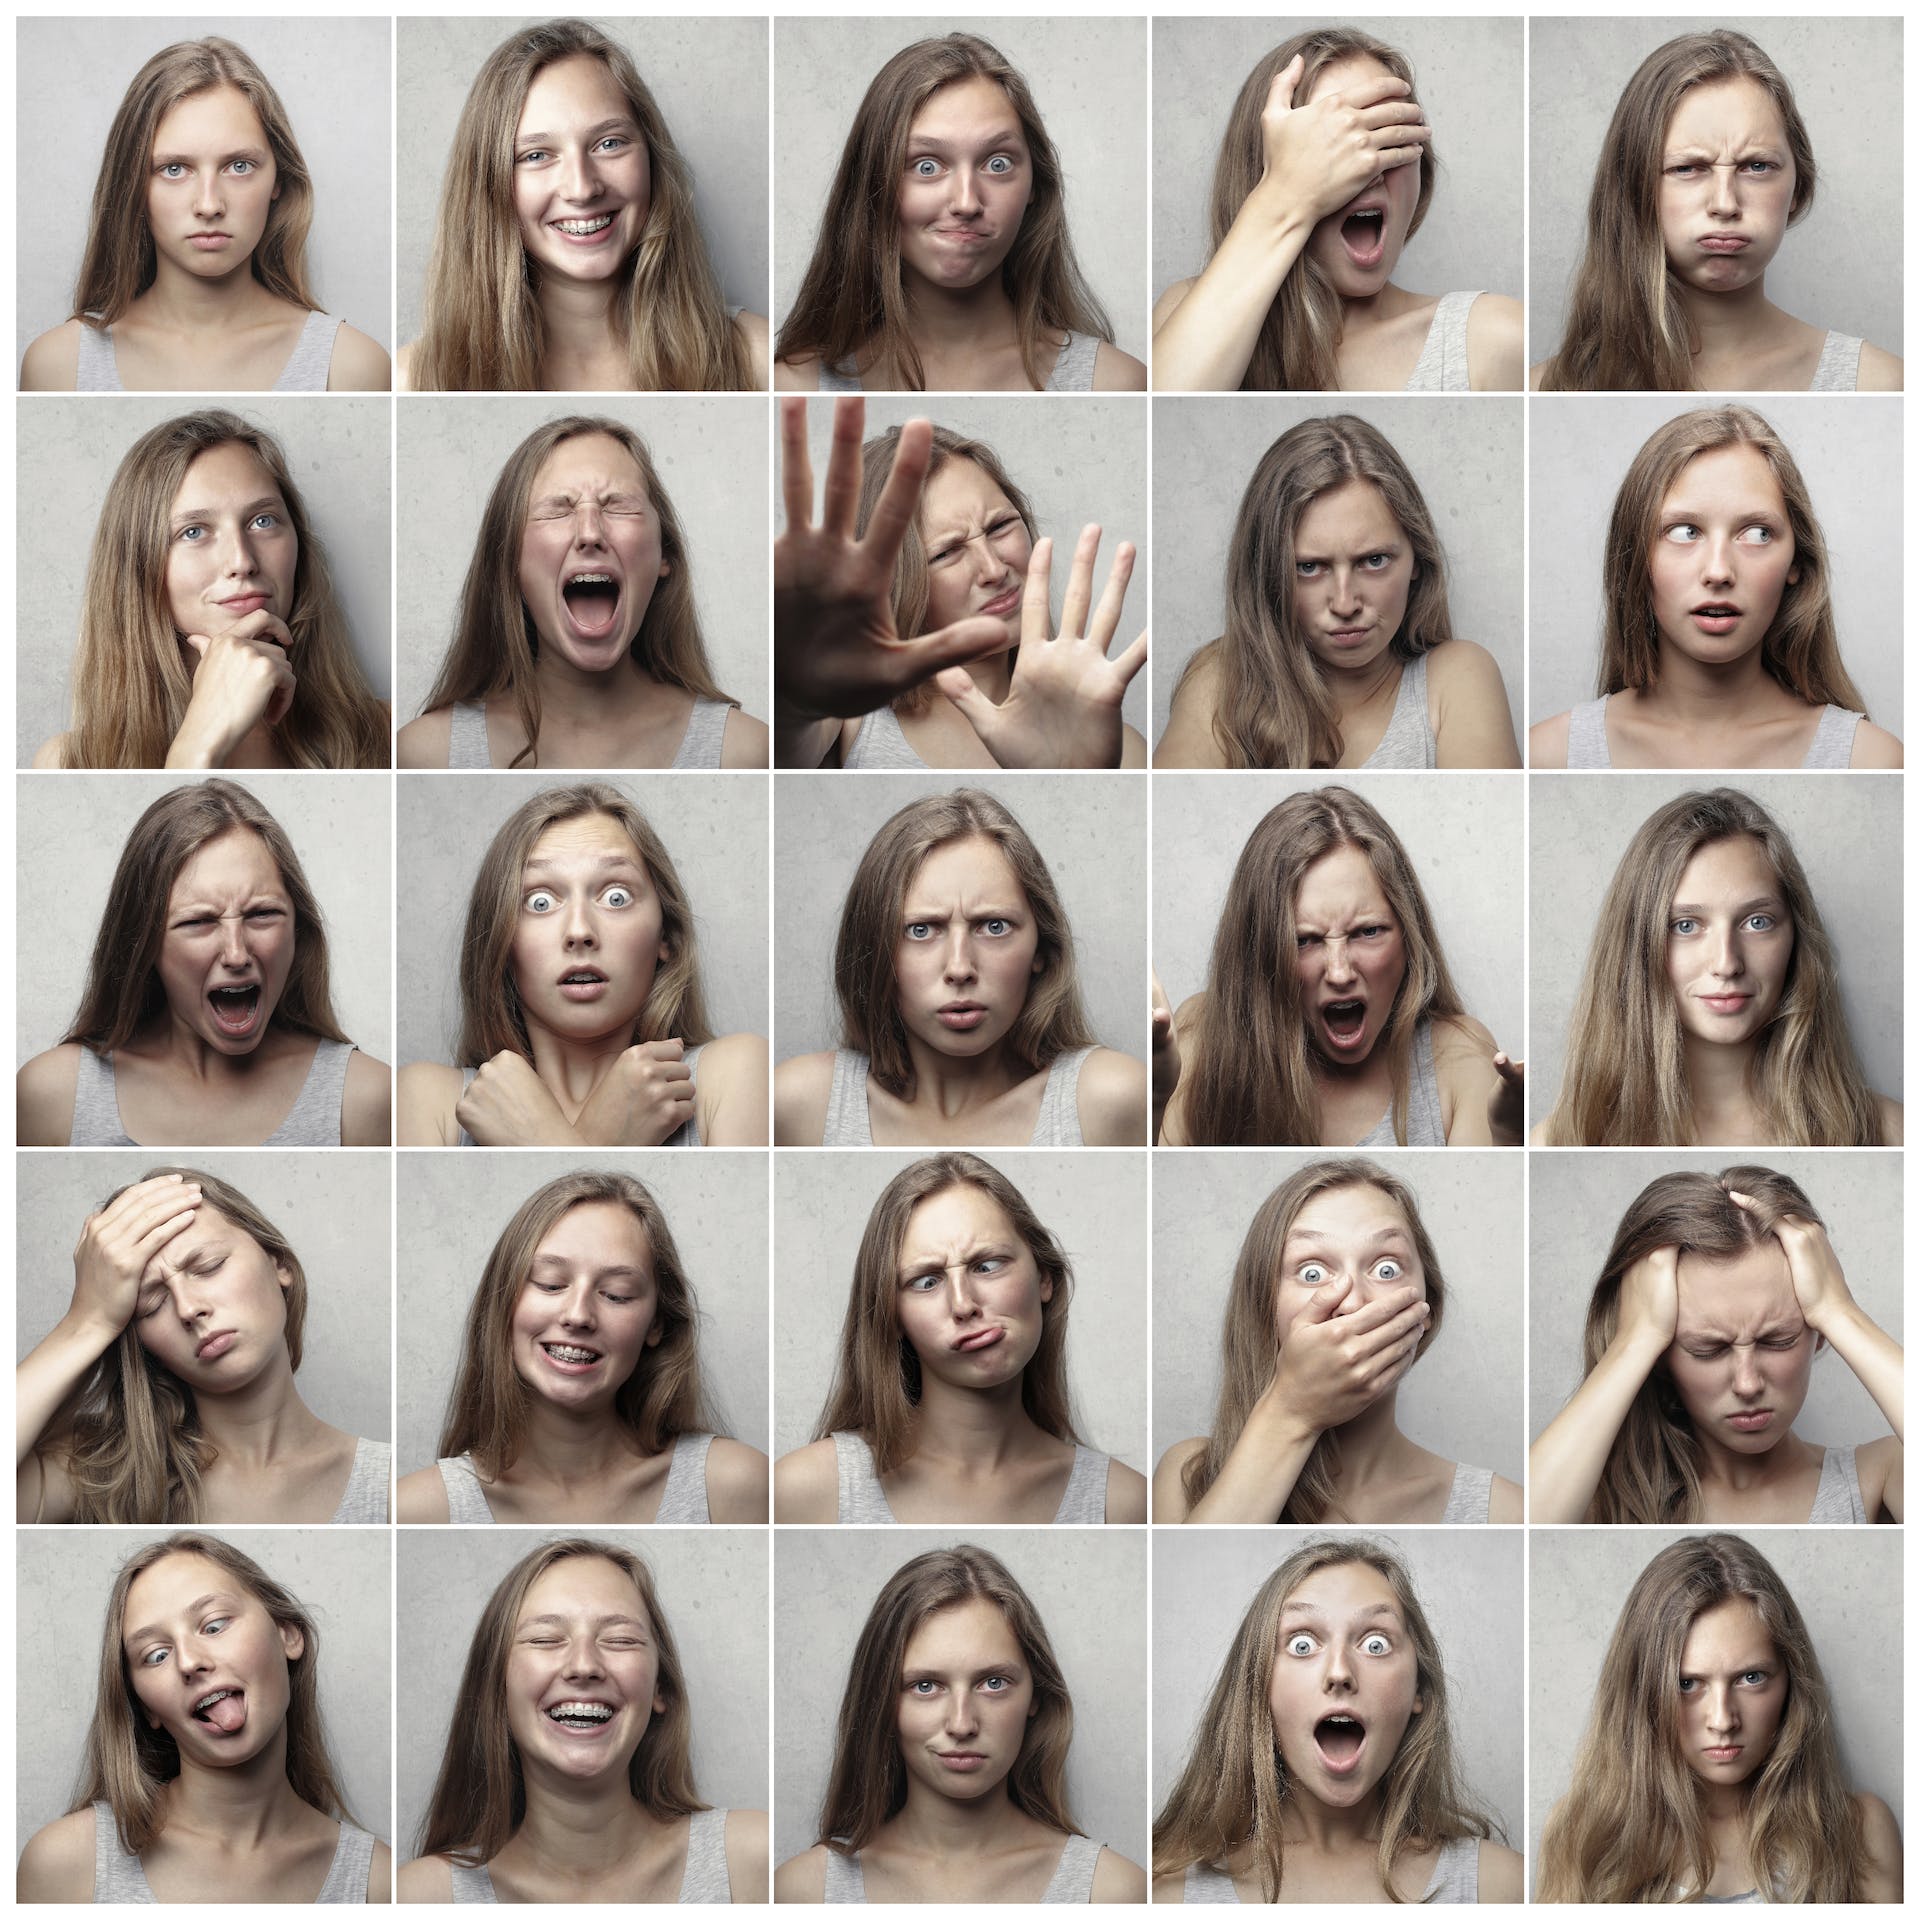 Collage of diverse facial expressions by a single woman, representing the range of human emotions, symbolizing the effectiveness of brand storytelling strategies in engaging an audience.